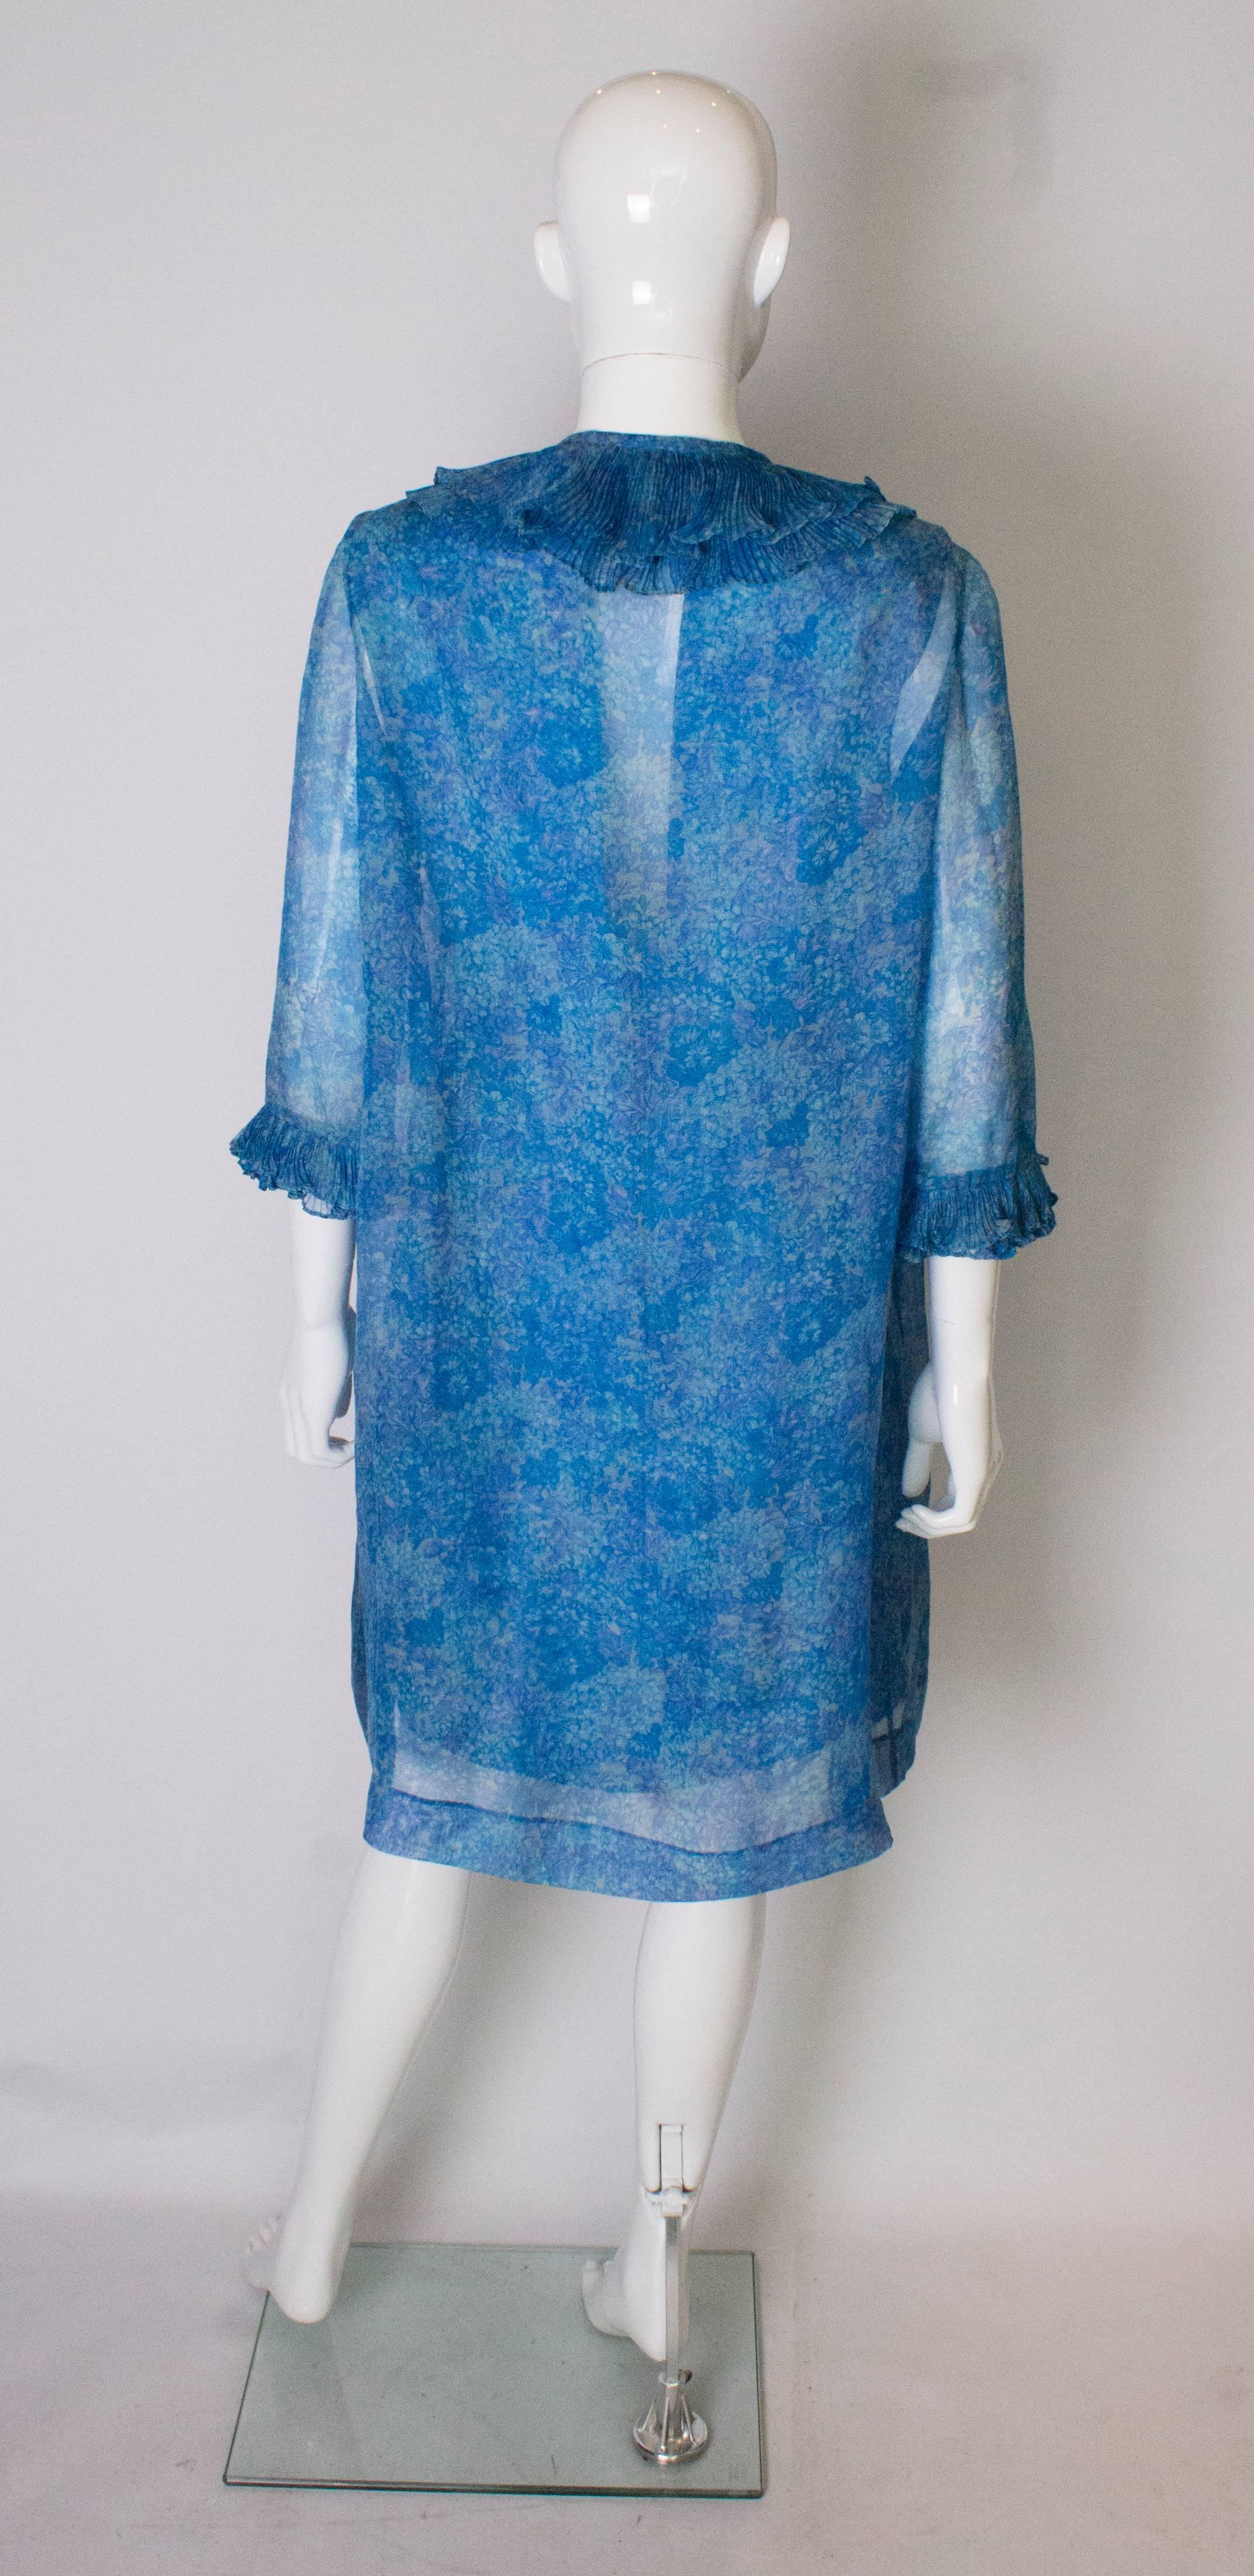 A Vintage 1960s blue printed Cocktail Dress and sheer matching Jacket 1